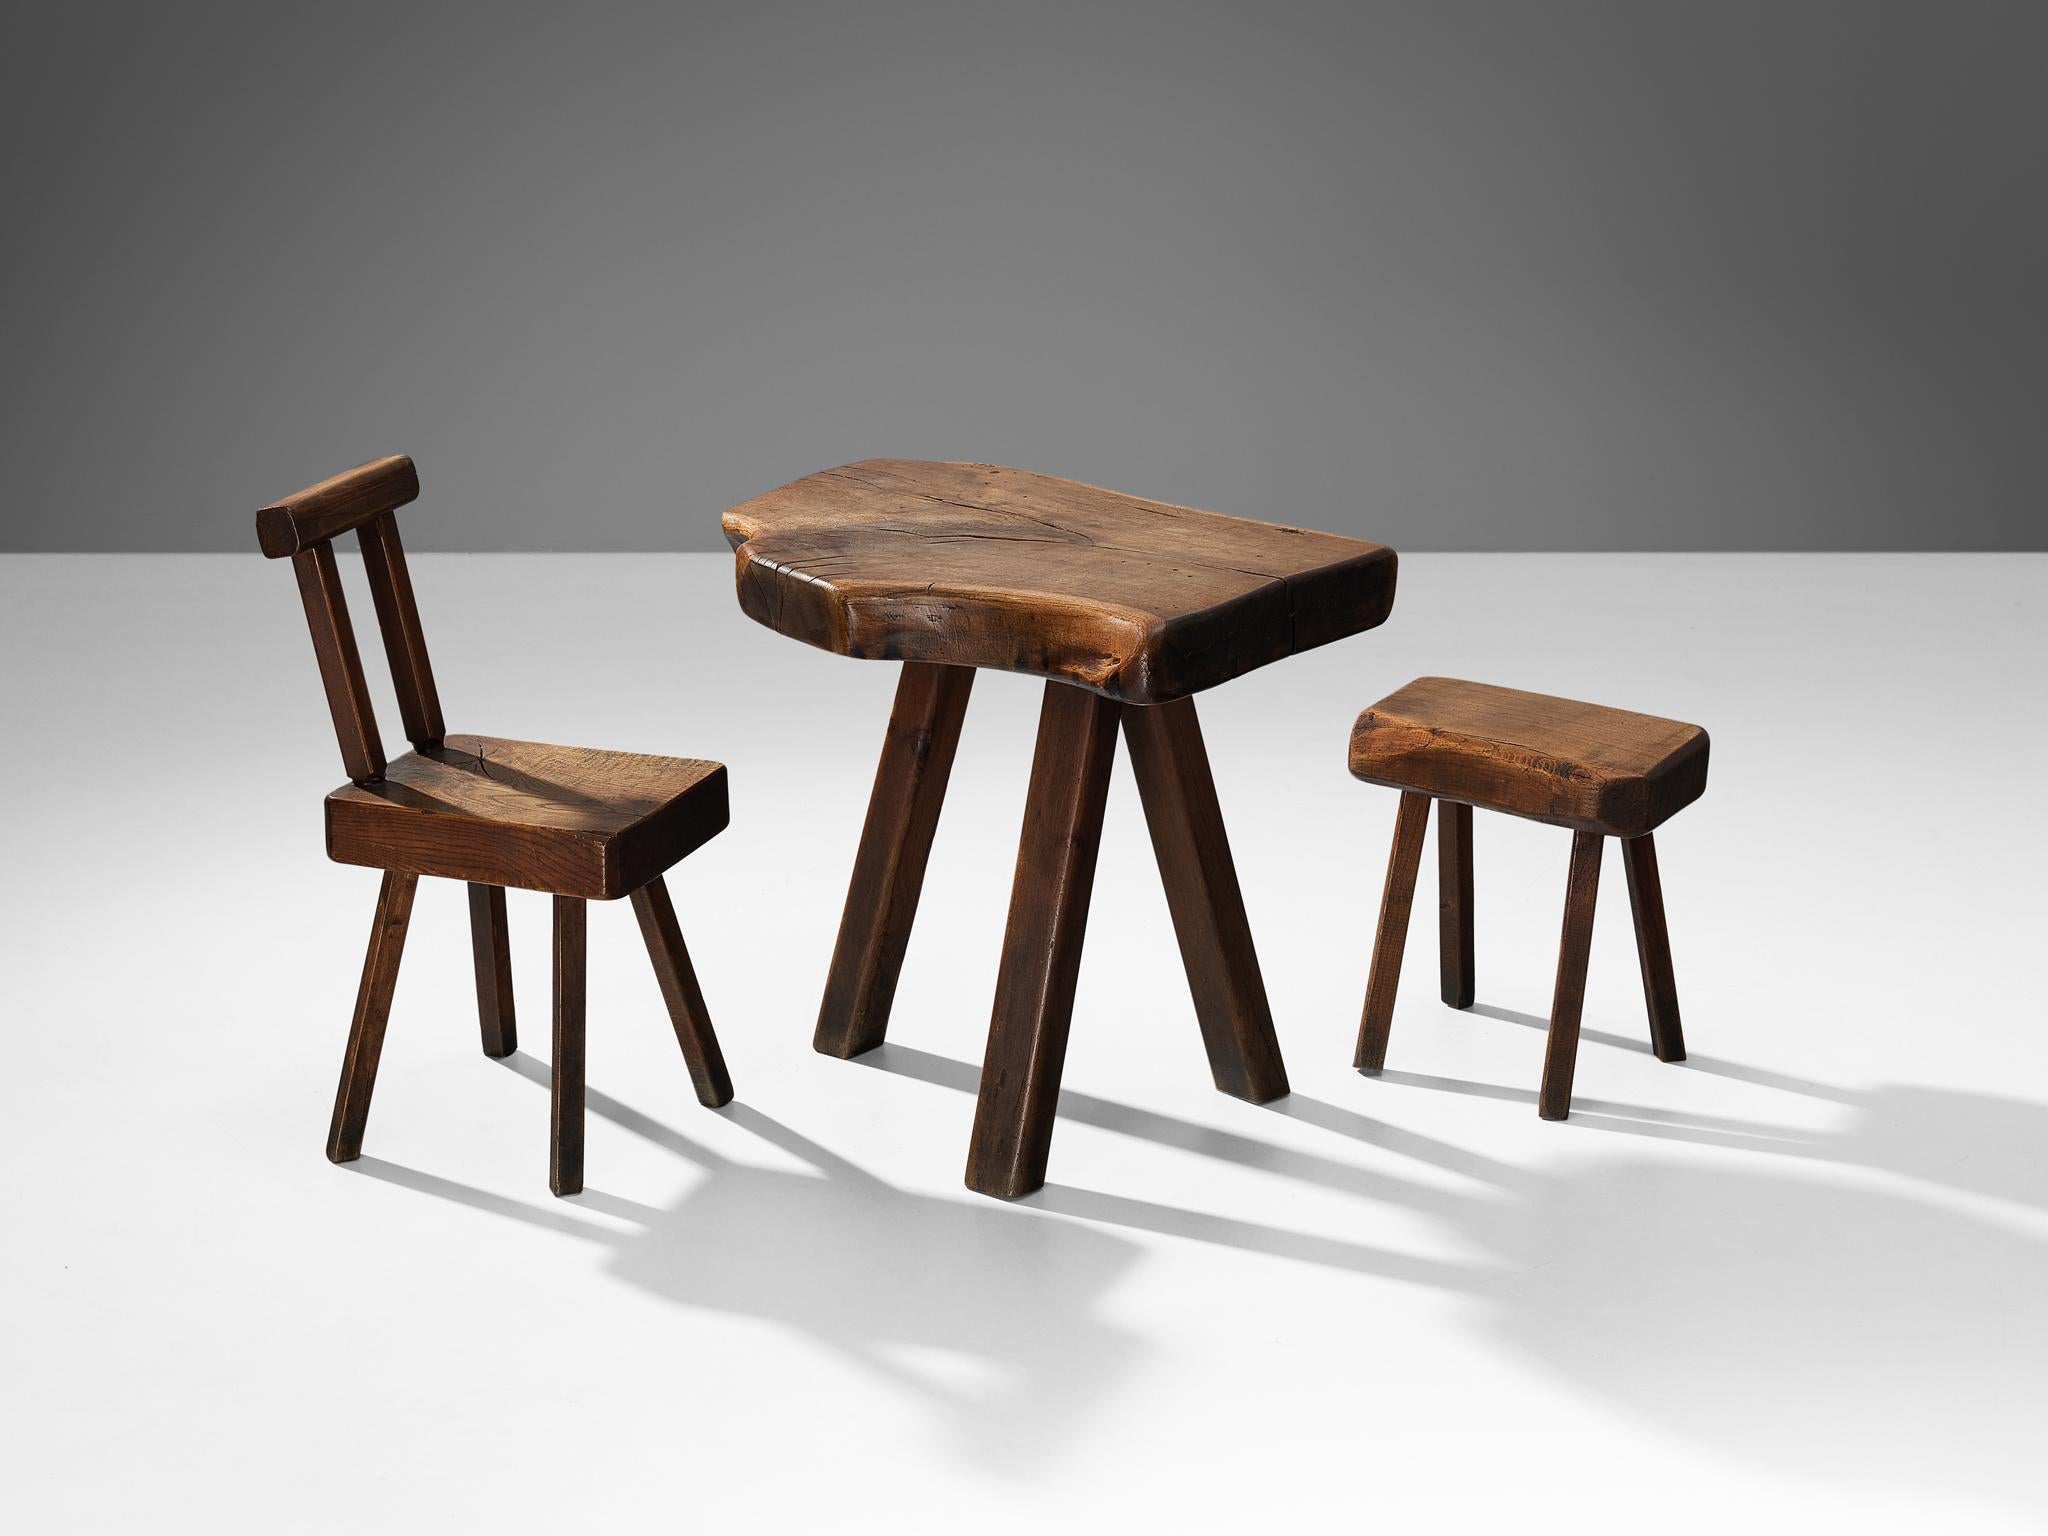 Mobichalet, set of table, chair, and stool, oak, beech, Belgium, 1950s

This rustic set will come forward nicely in a relaxing atmosphere, like a patio or a studio space. The brutalist appearance is expressed through robust forms and strong lines.